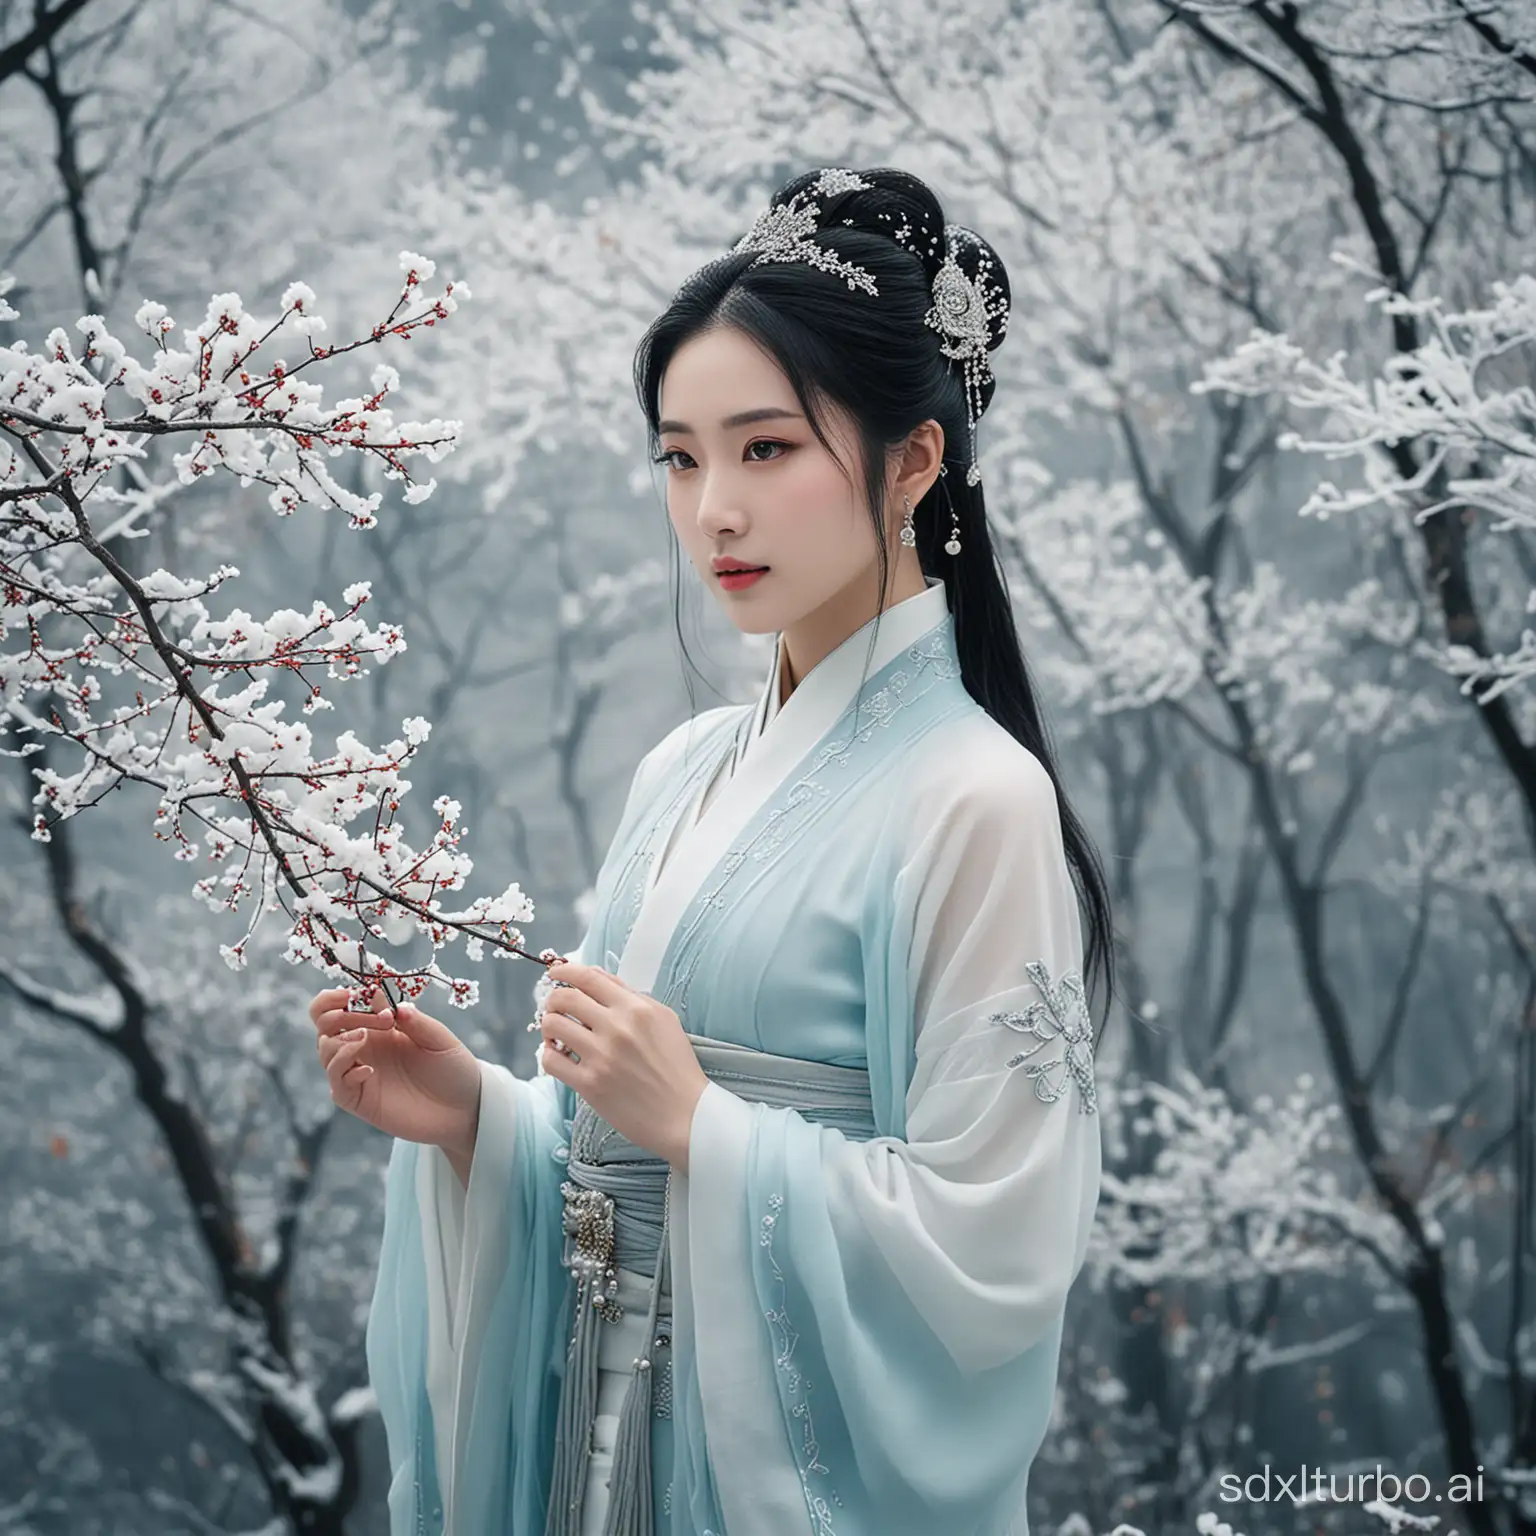 The cold beauty of China, with a great sense of love, looks at the ethereal goddess.